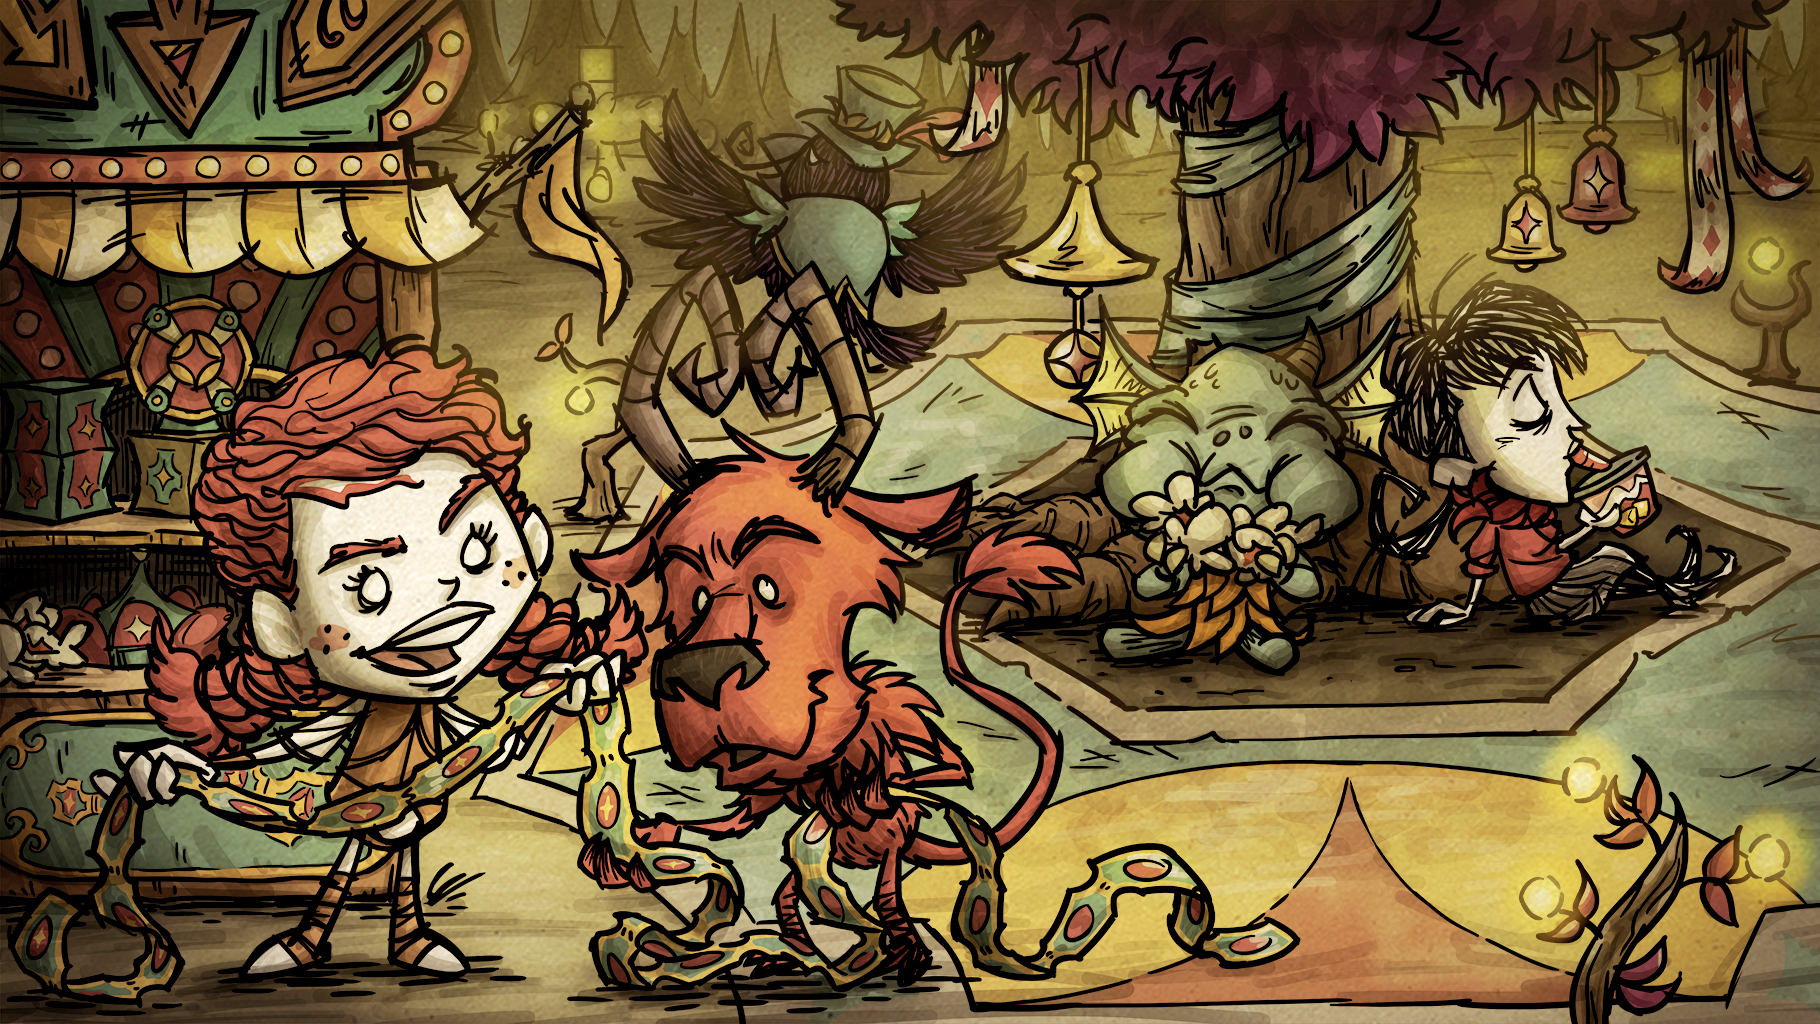 Ю донт фул. Don't Starve игра. Don't Starve together карнавал. Донт старв 3. Don't Starve together игрушки.